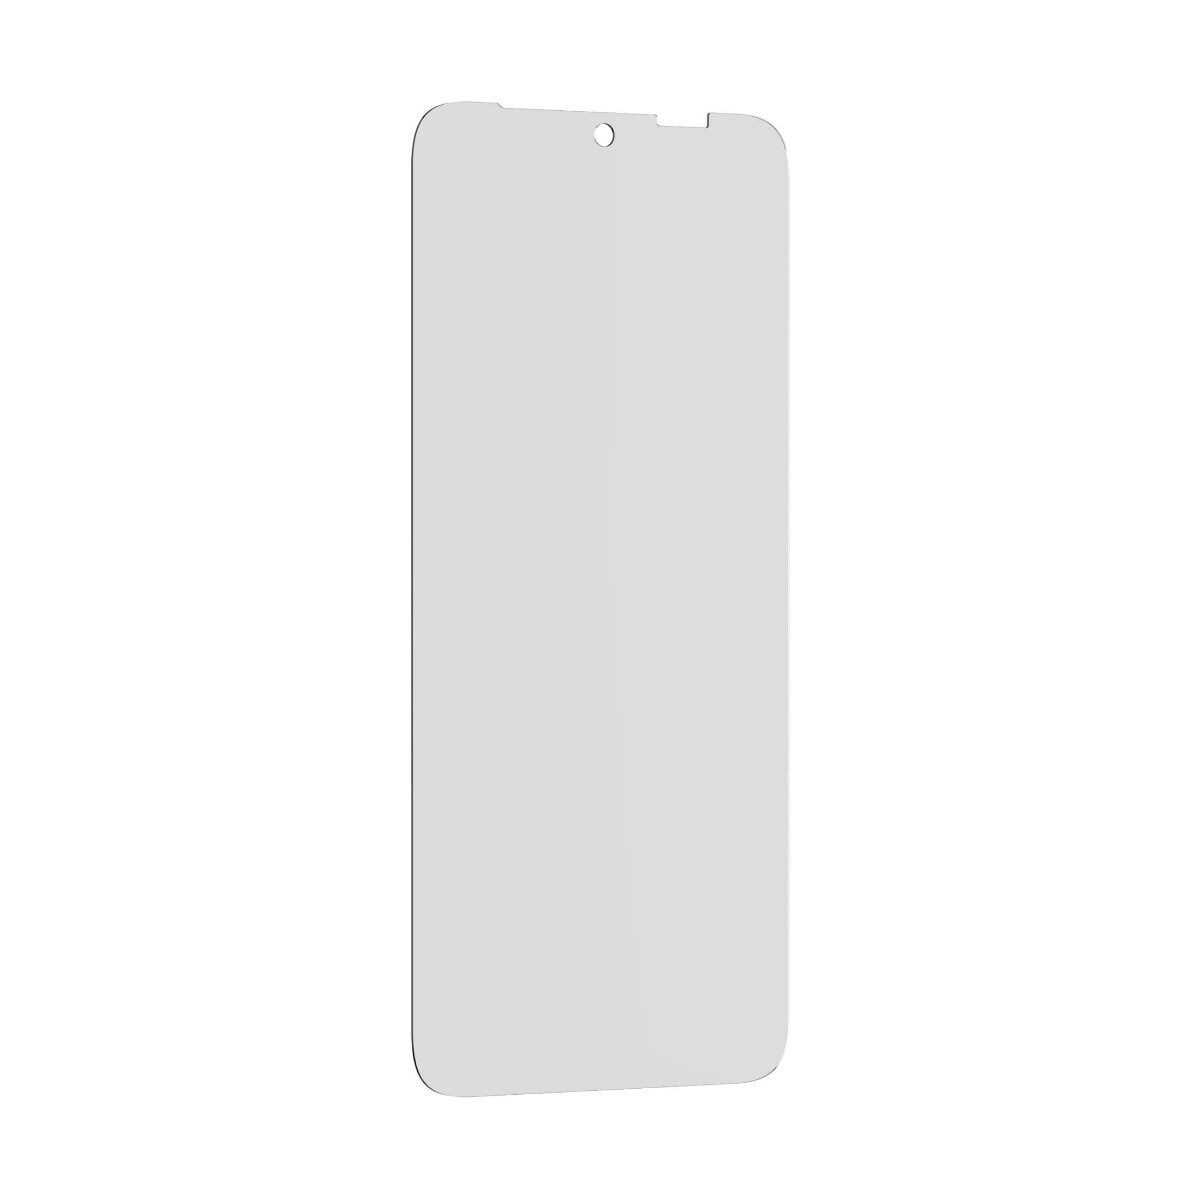 Fairphone F4PRTC-1PF-WW1 display privacy filters Frameless display privacy filter 16 cm (6.3") 9H